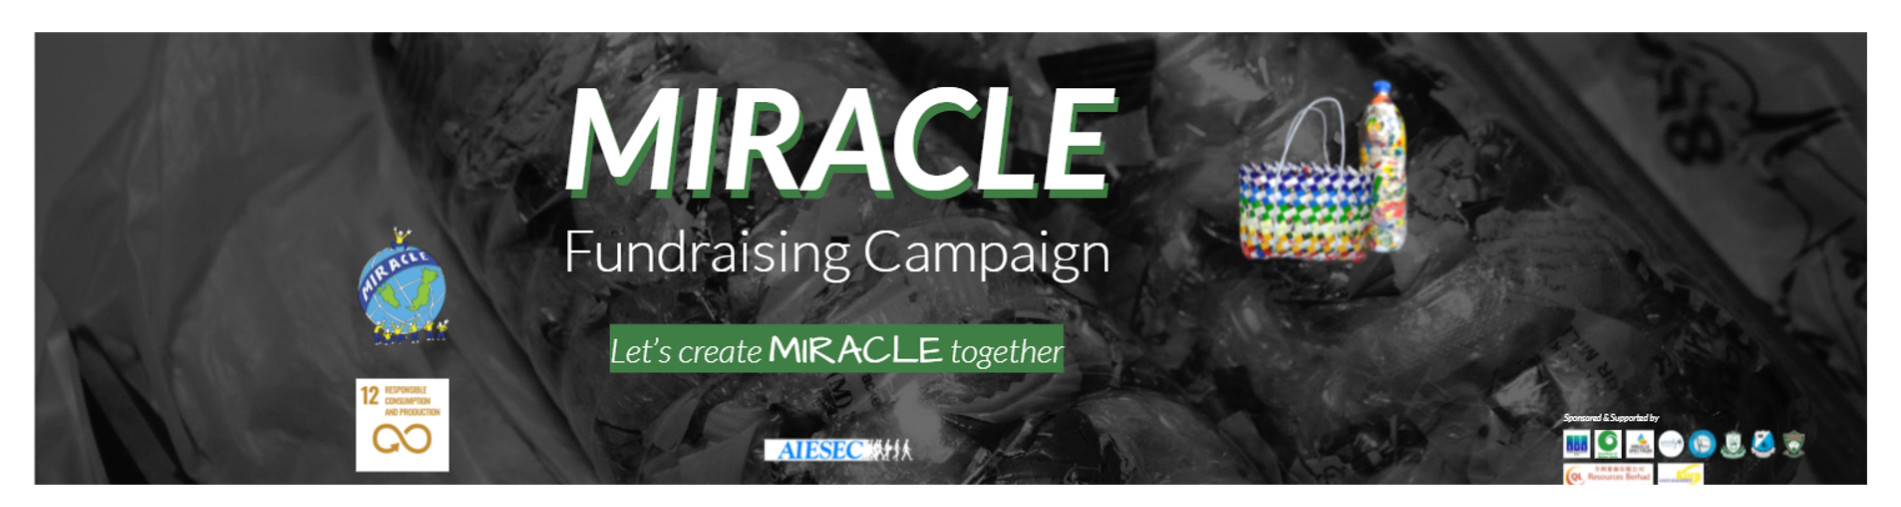 Miracle Fundraising campaign